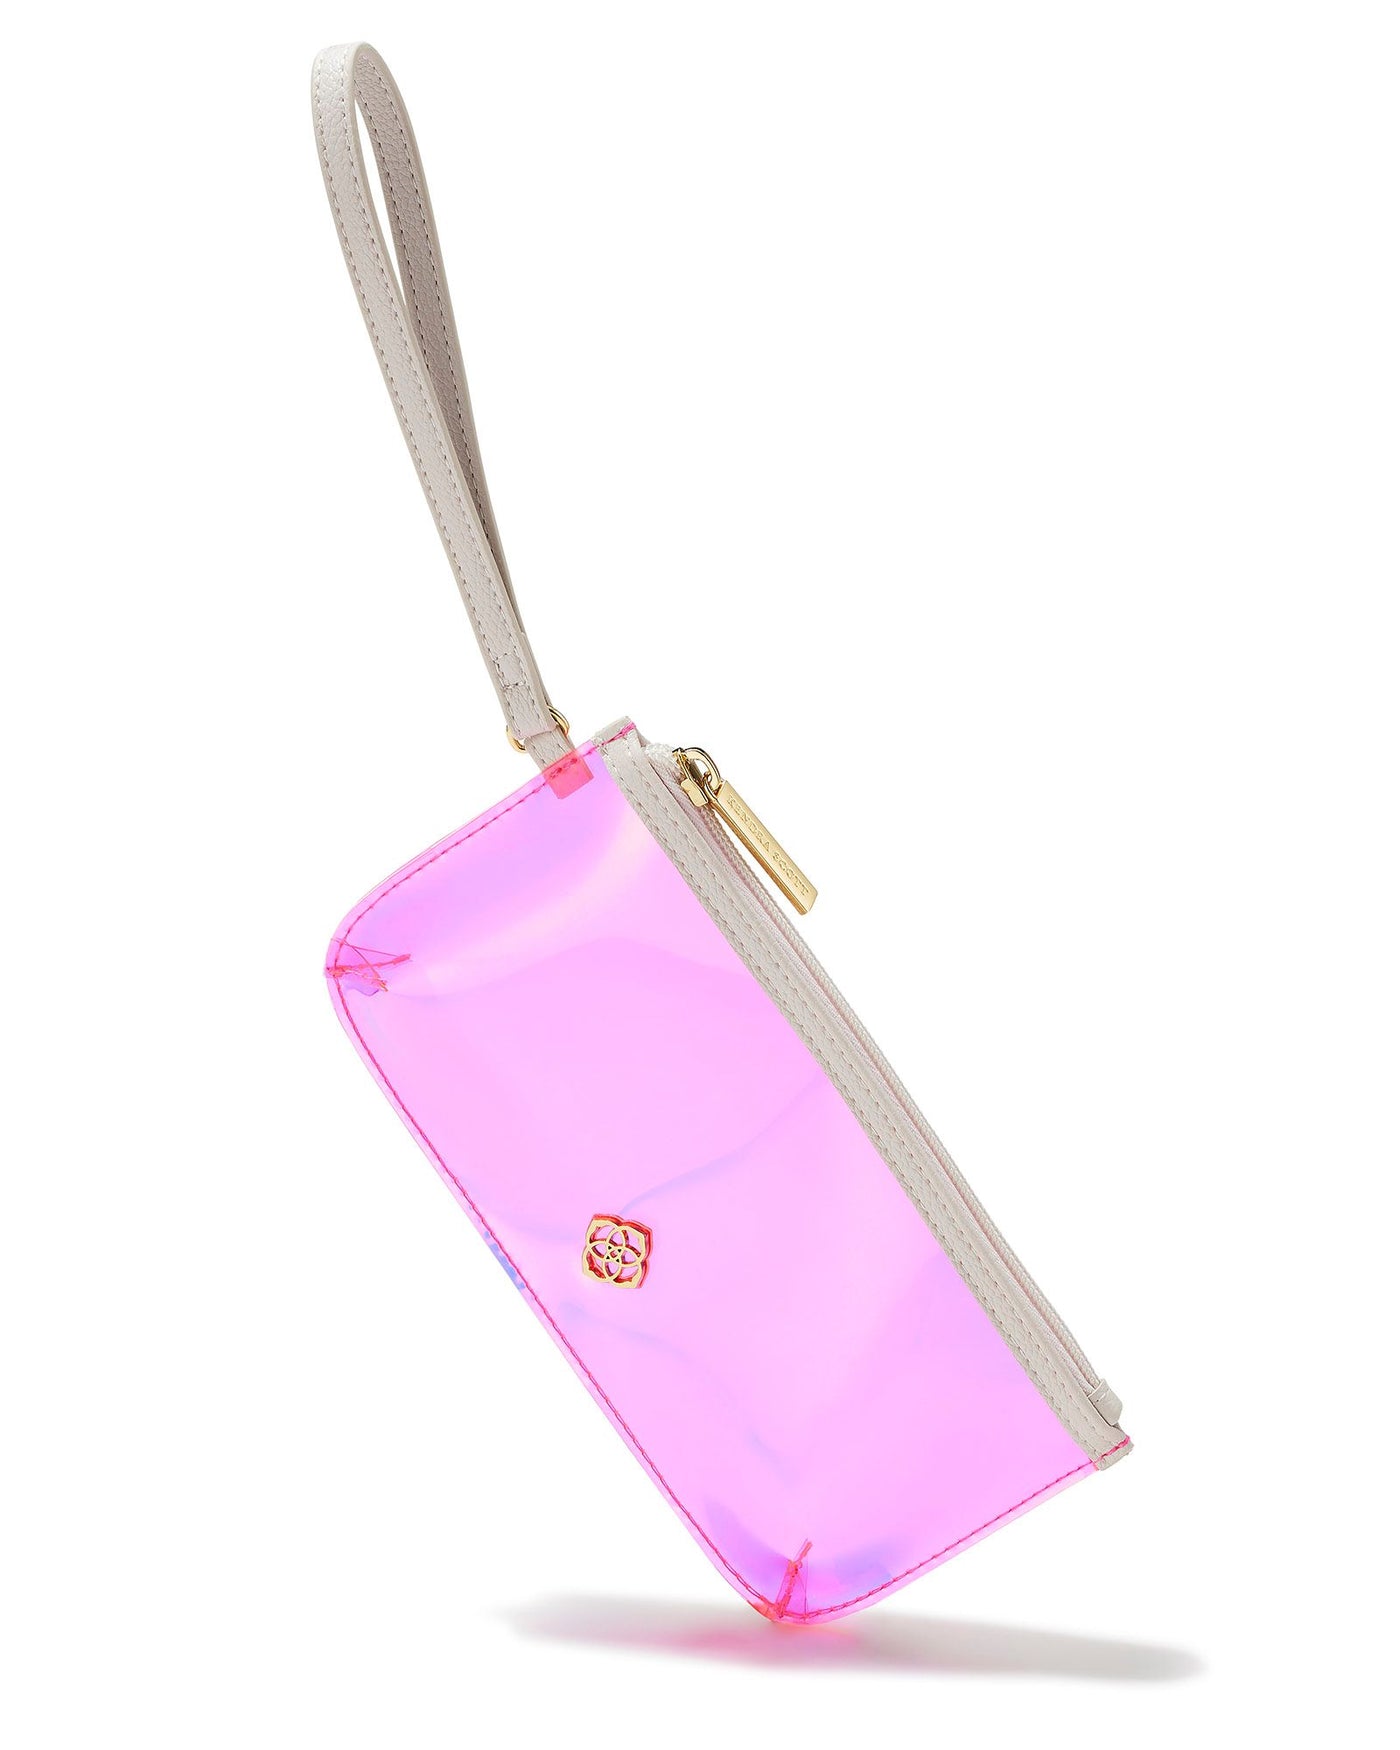 Kendra Scott Clear Pink Iridescent Wristlet on white background.